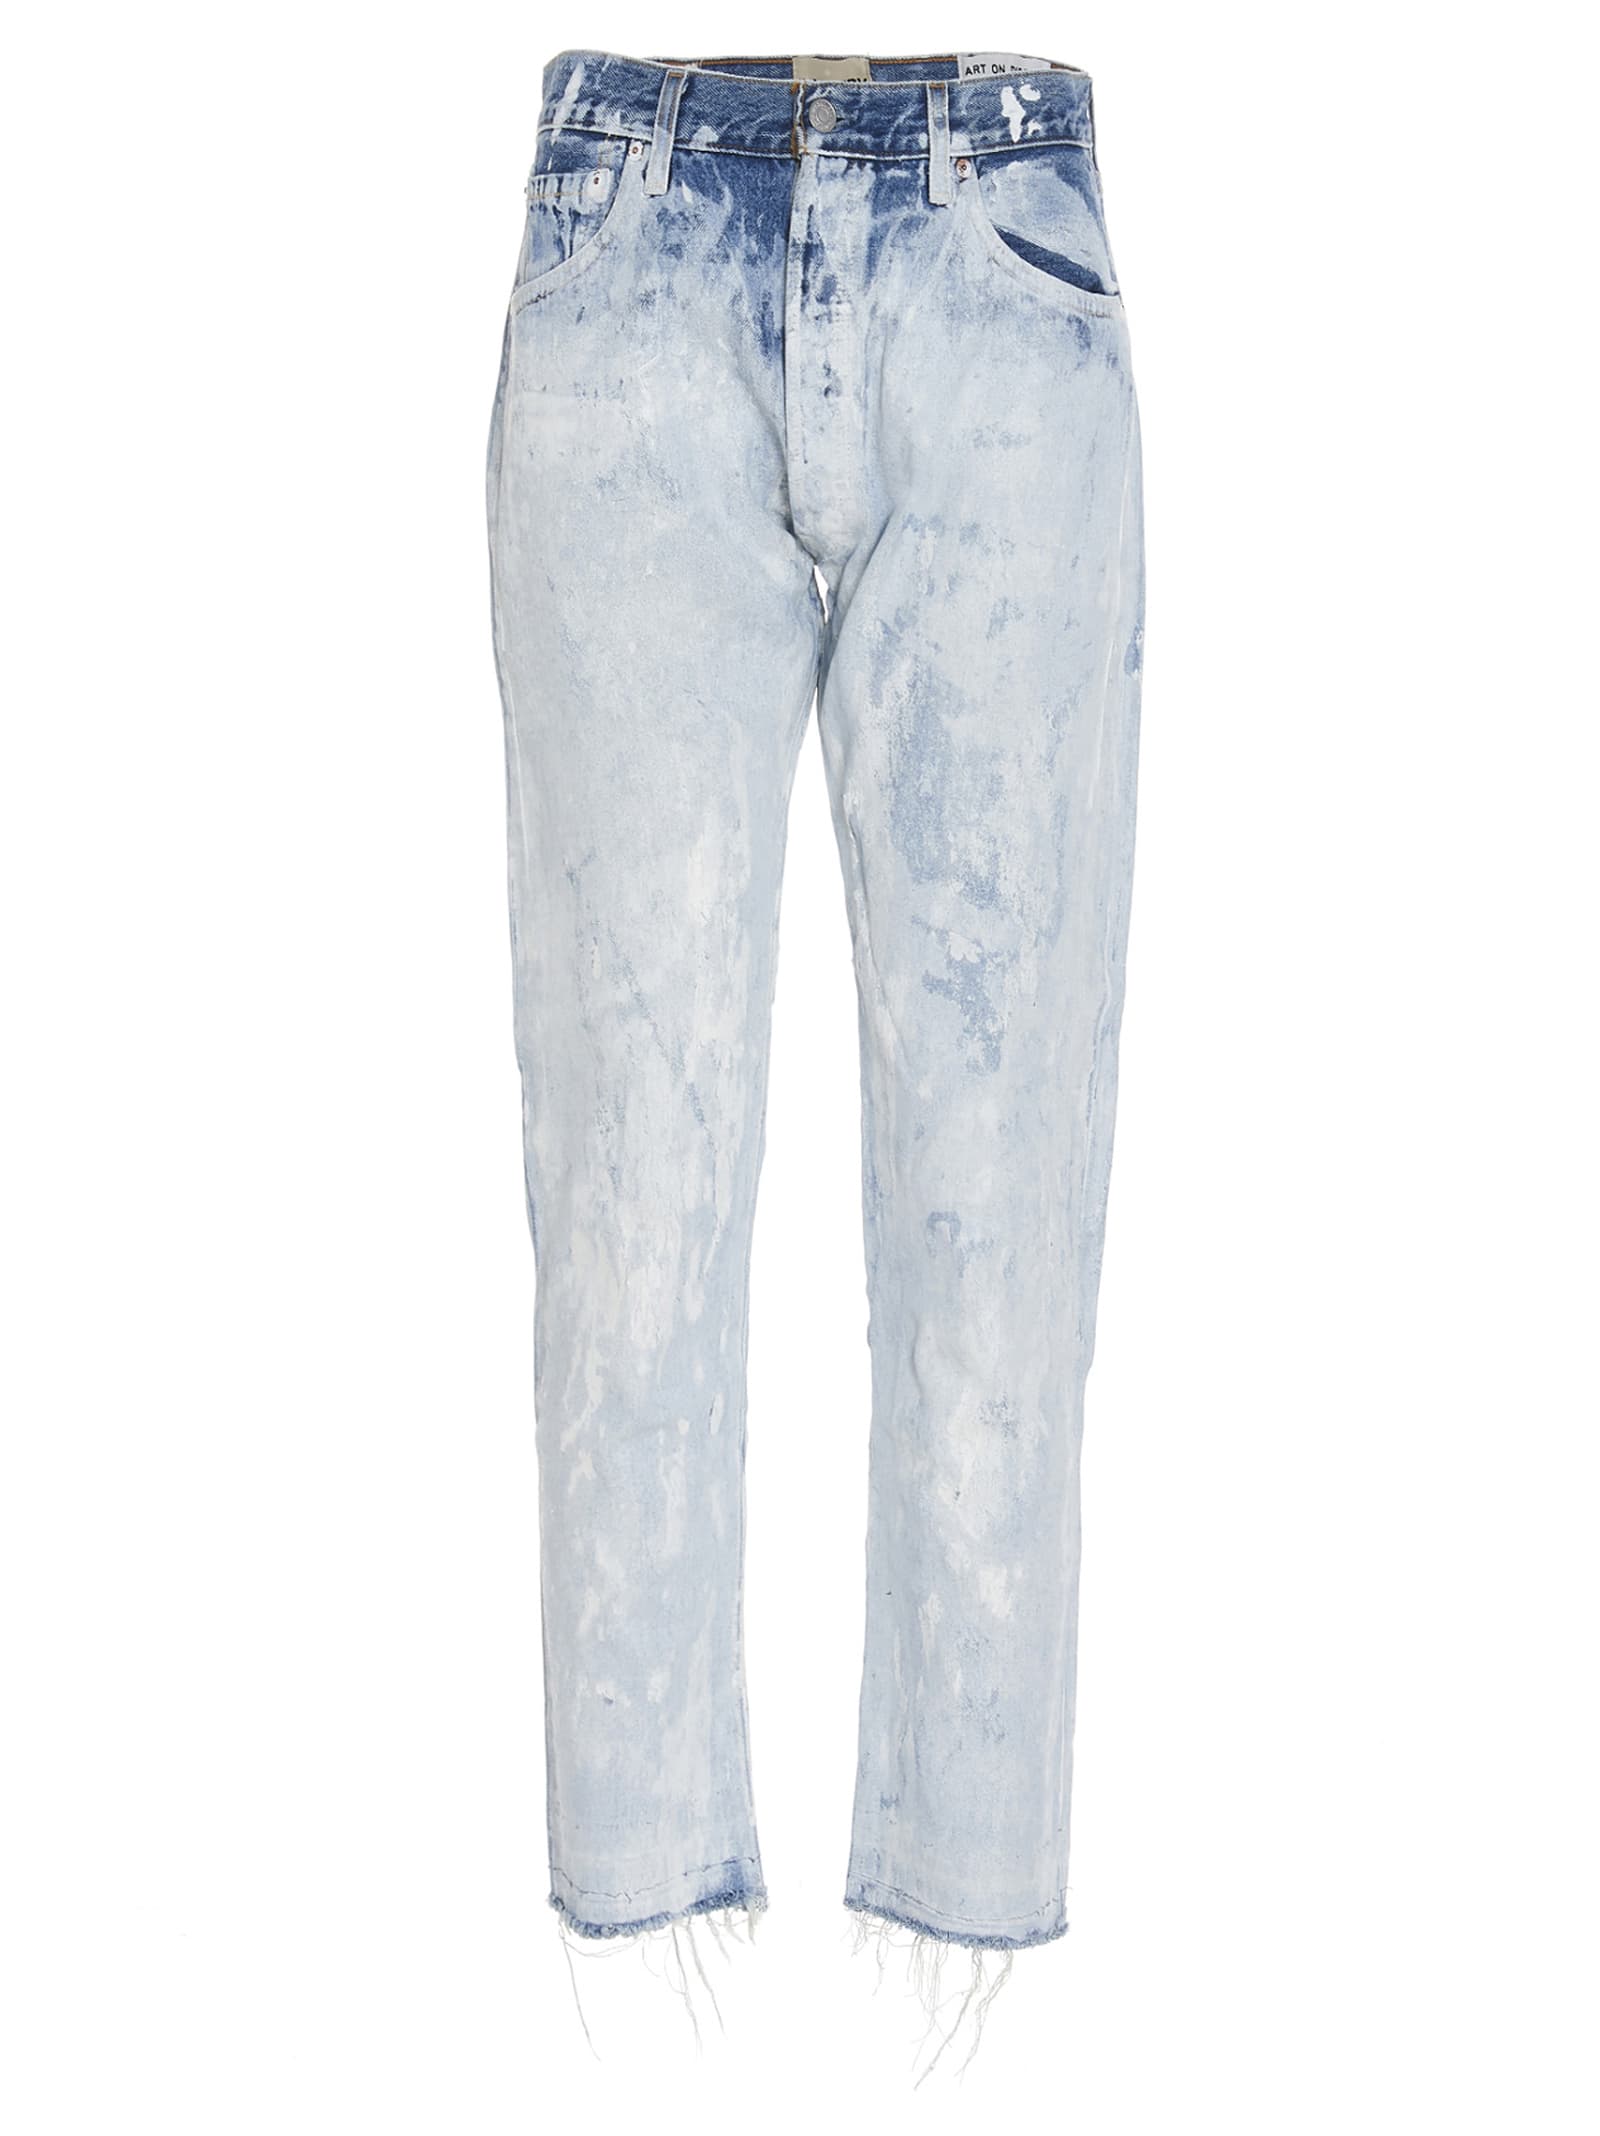 GALLERY DEPT. ARTIFACT FIT JEANS,GDAF5030 WHITEPAINT